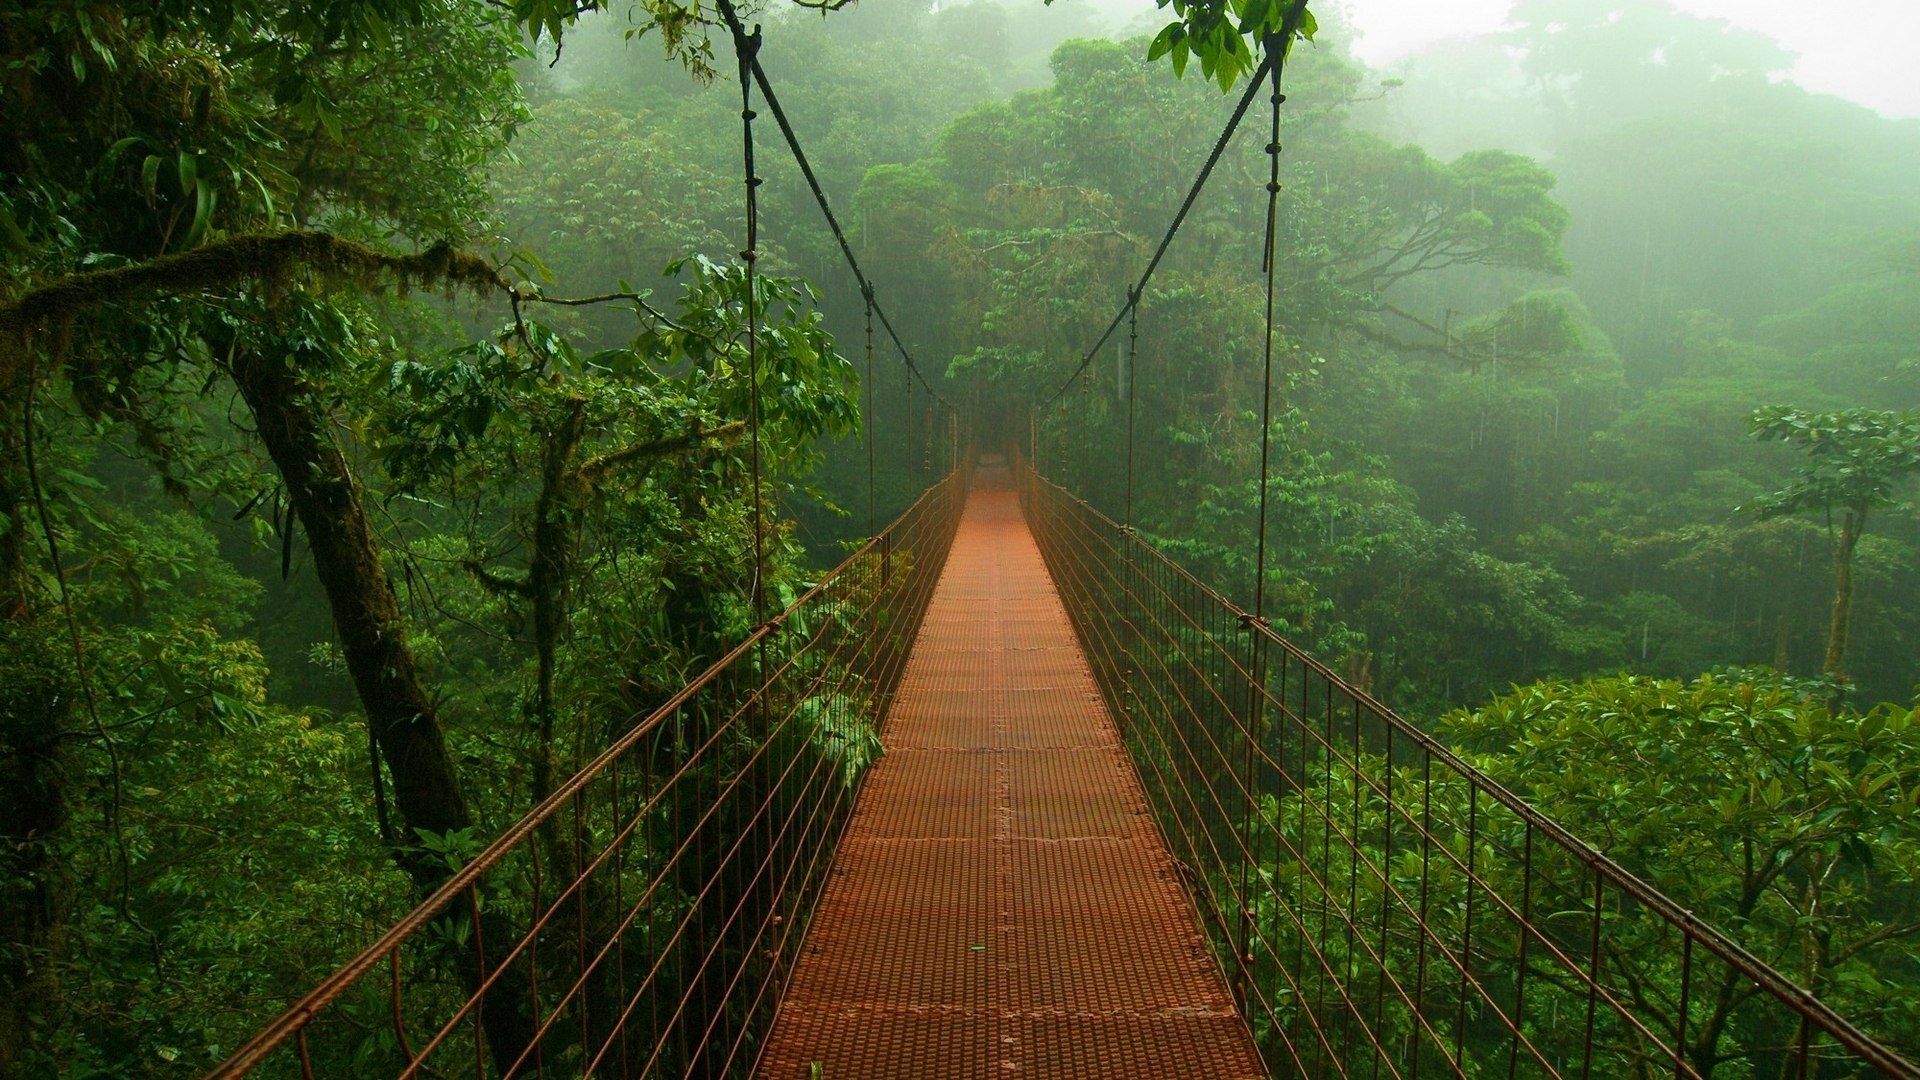 Bridge in the forests of the Amazon wallpapers and images ...